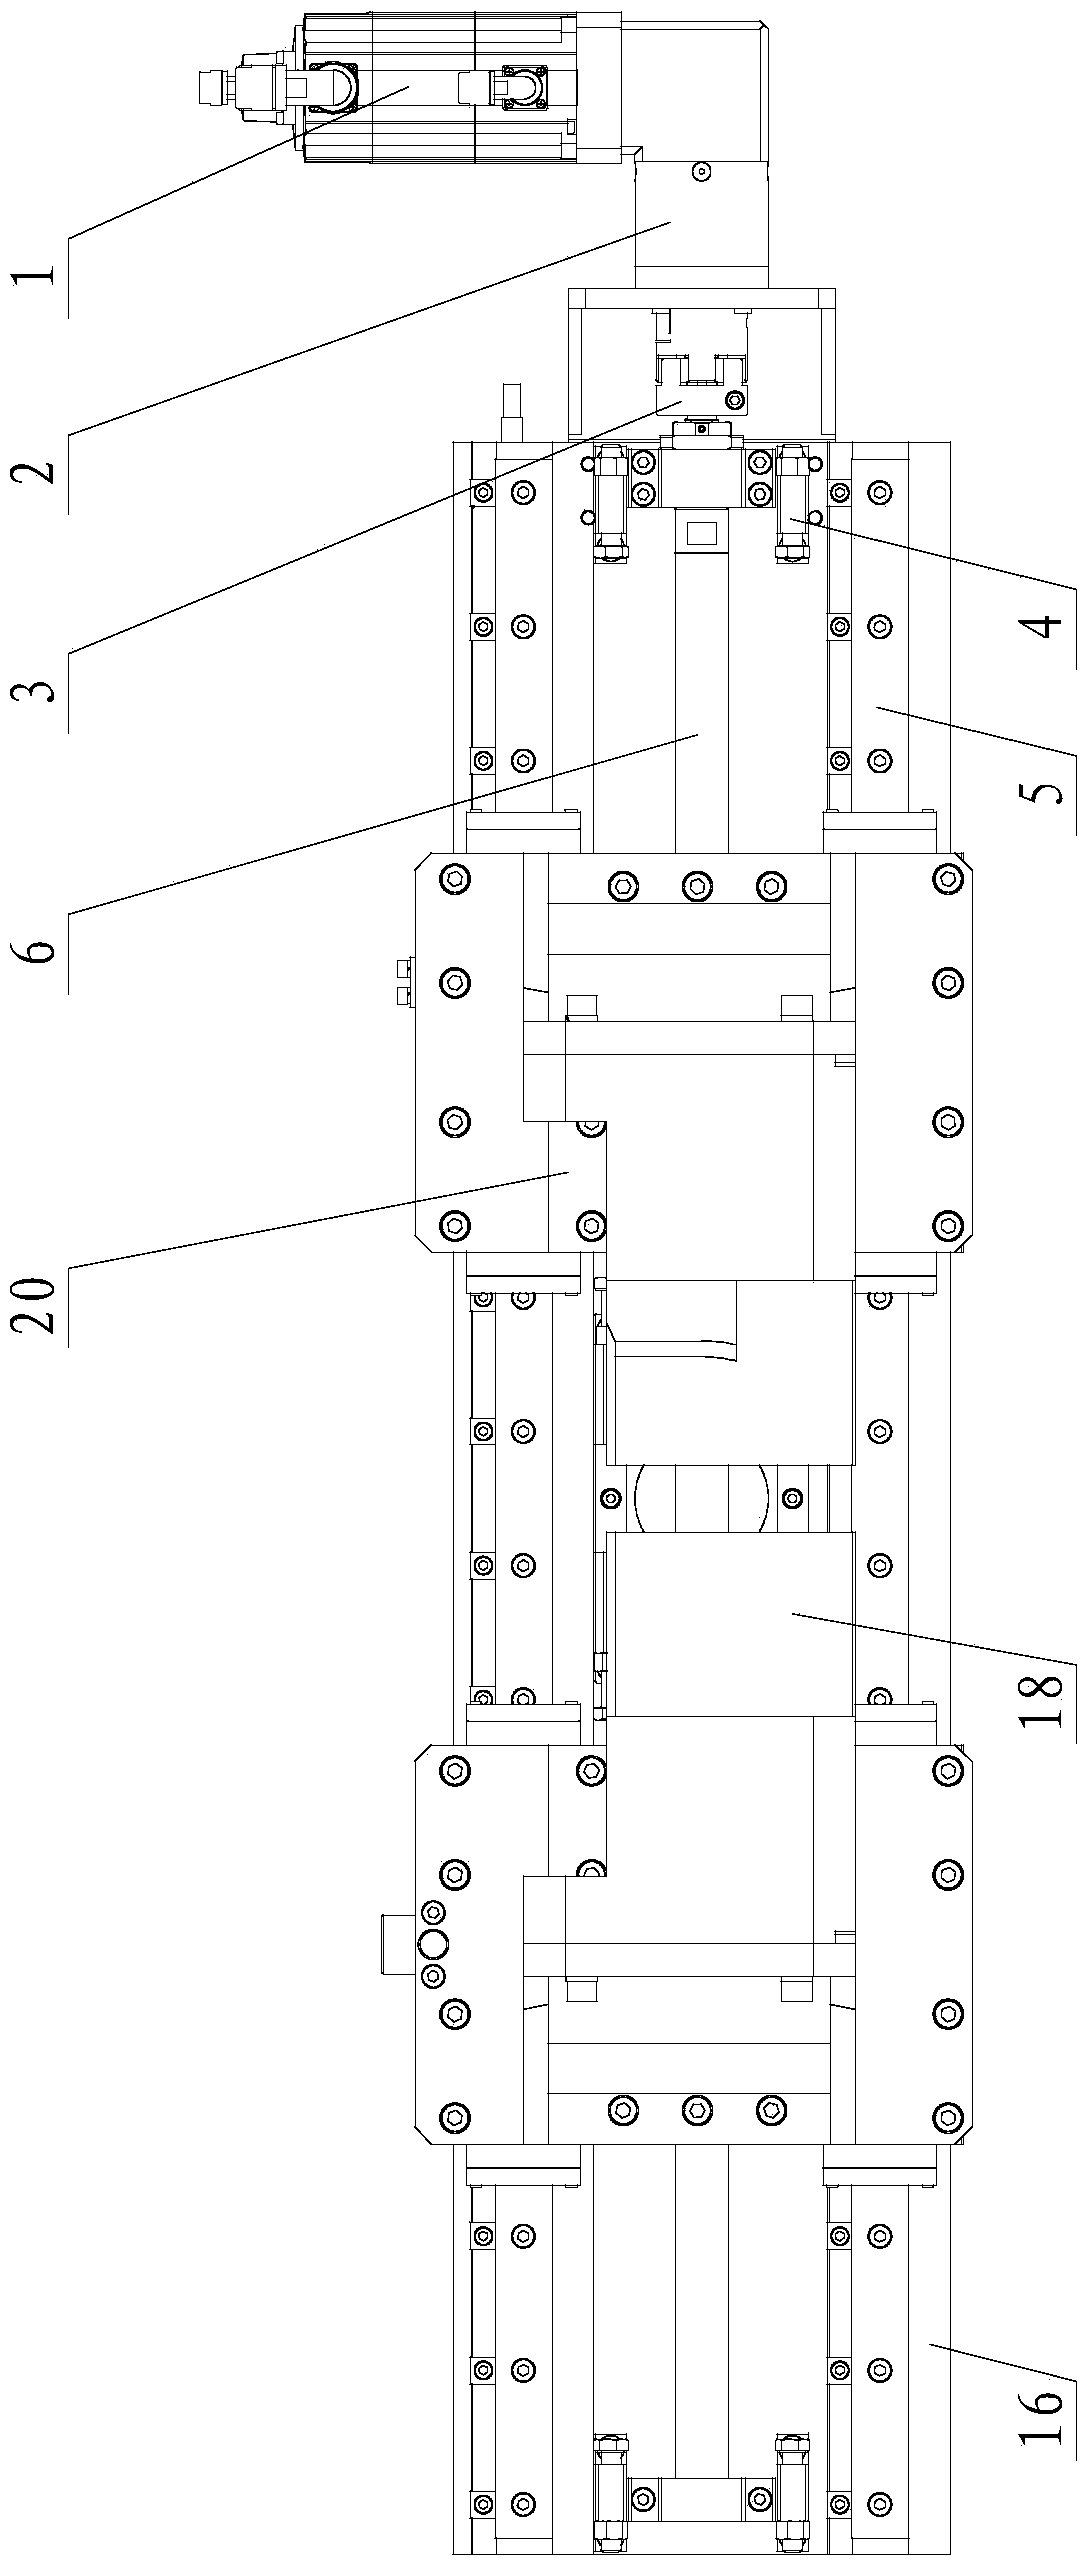 Full-automatic clamping mechanism oriented to large structural part